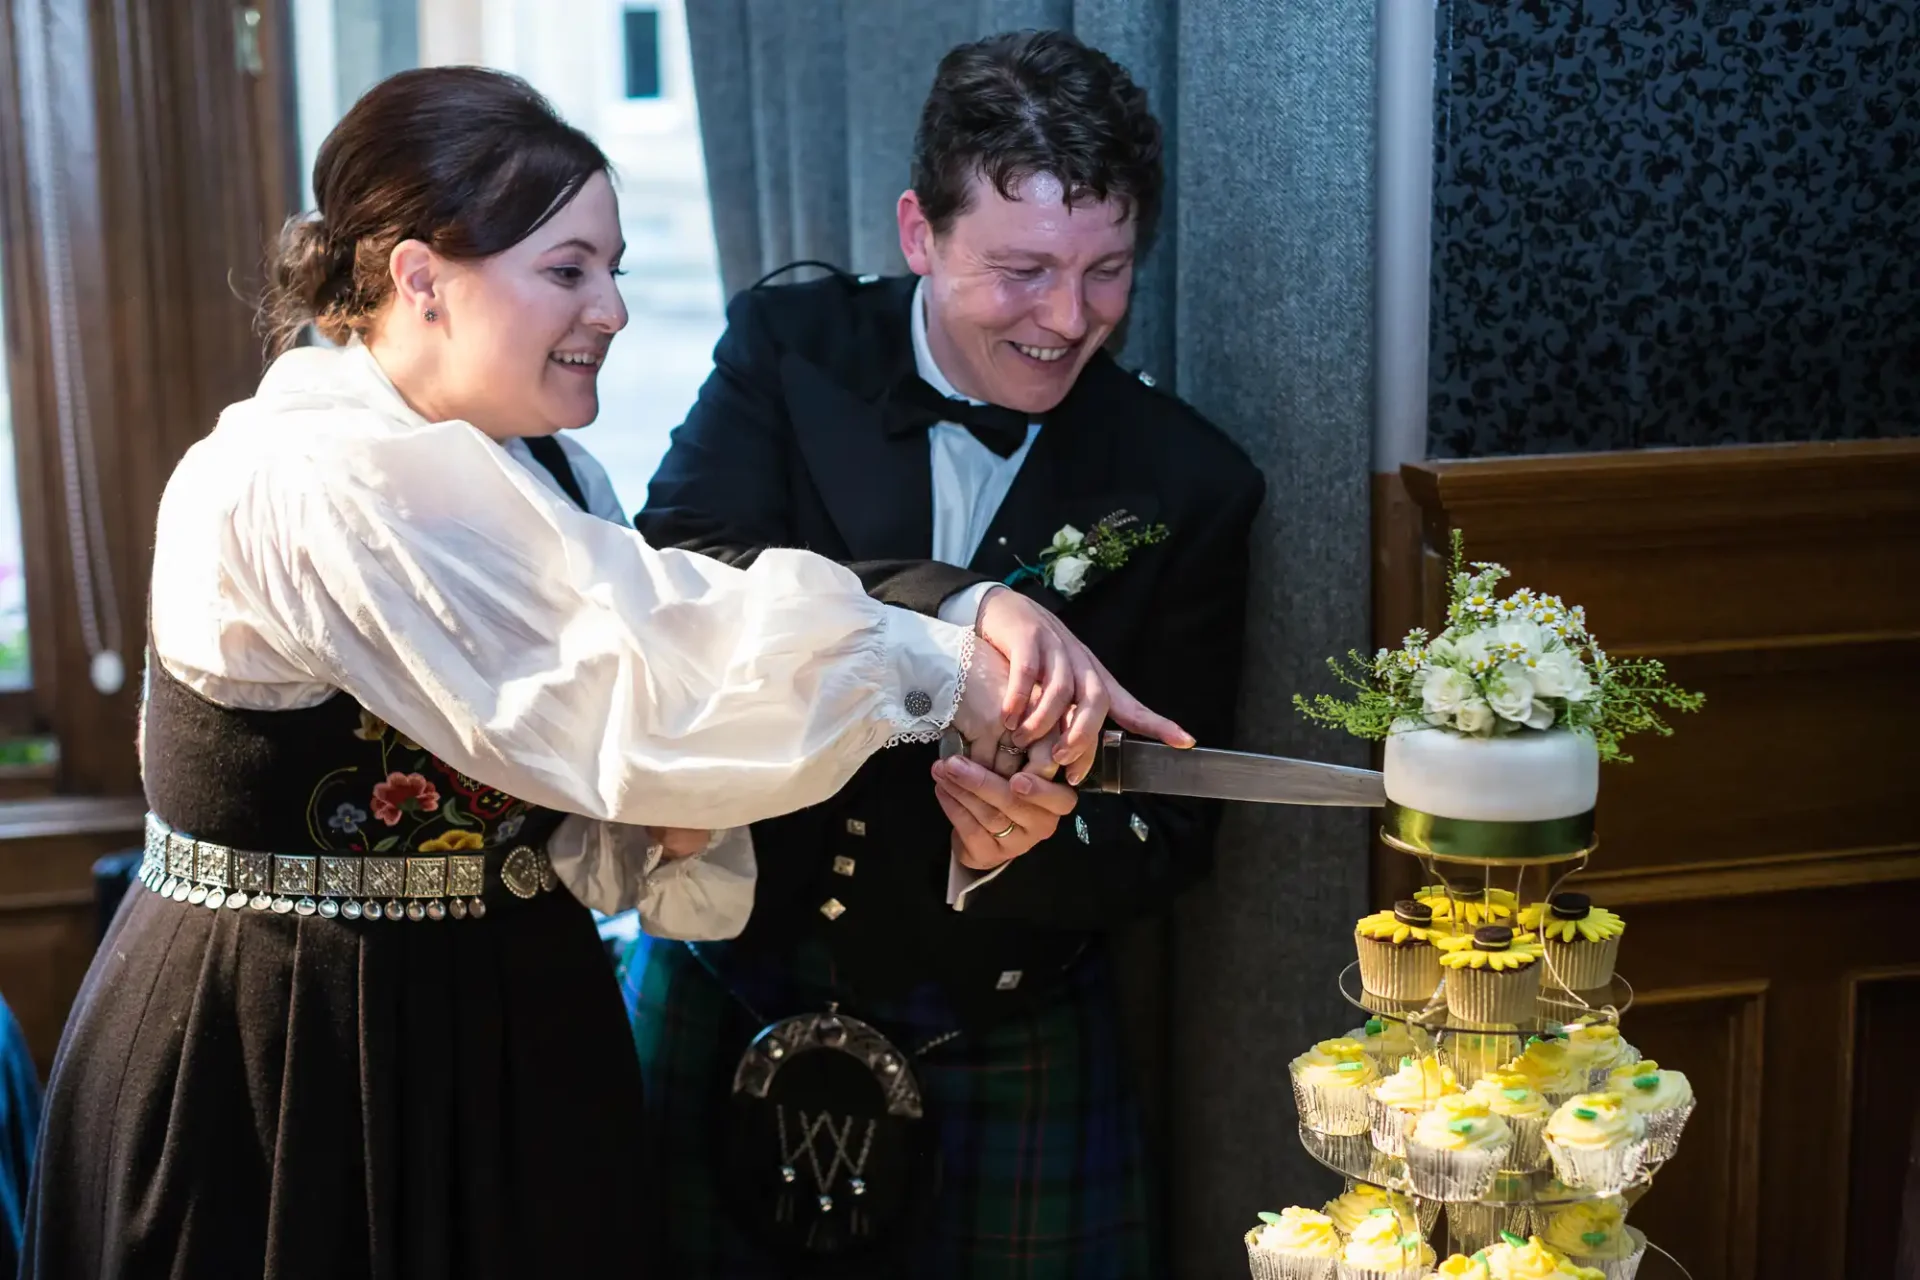 A bride and groom in traditional scottish attire smiling as they jointly cut a wedding cake with a sword.